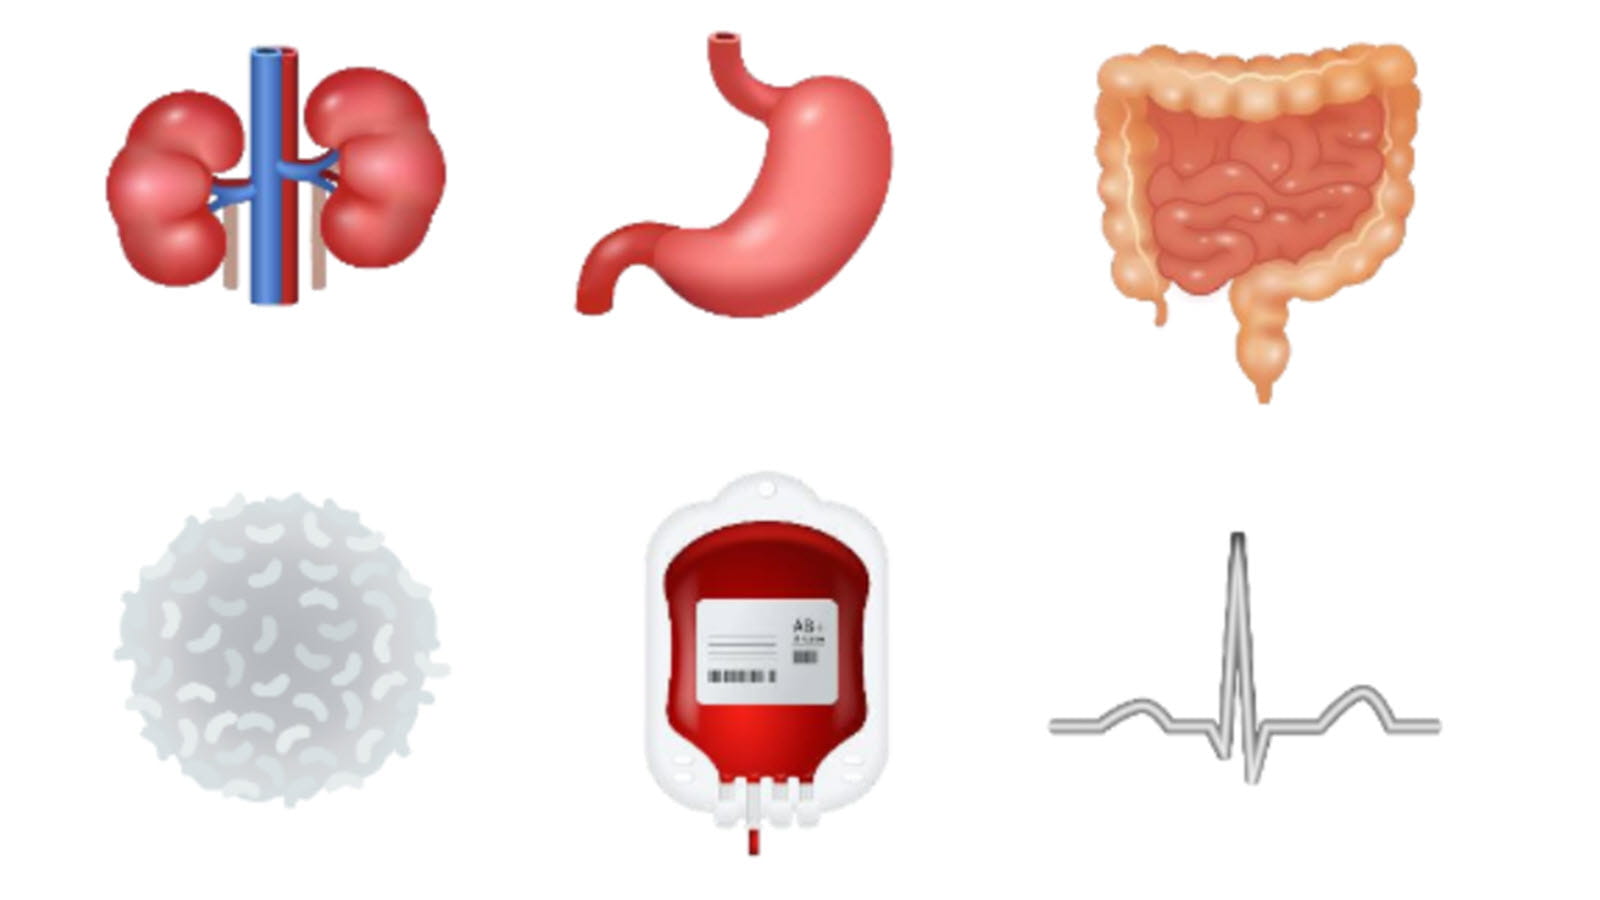 Six of 10 emojis proposed by doctors. They include kidneys, the stomach, the intestines, a white blood cell, a bag of donated blood, and EKG rhythm